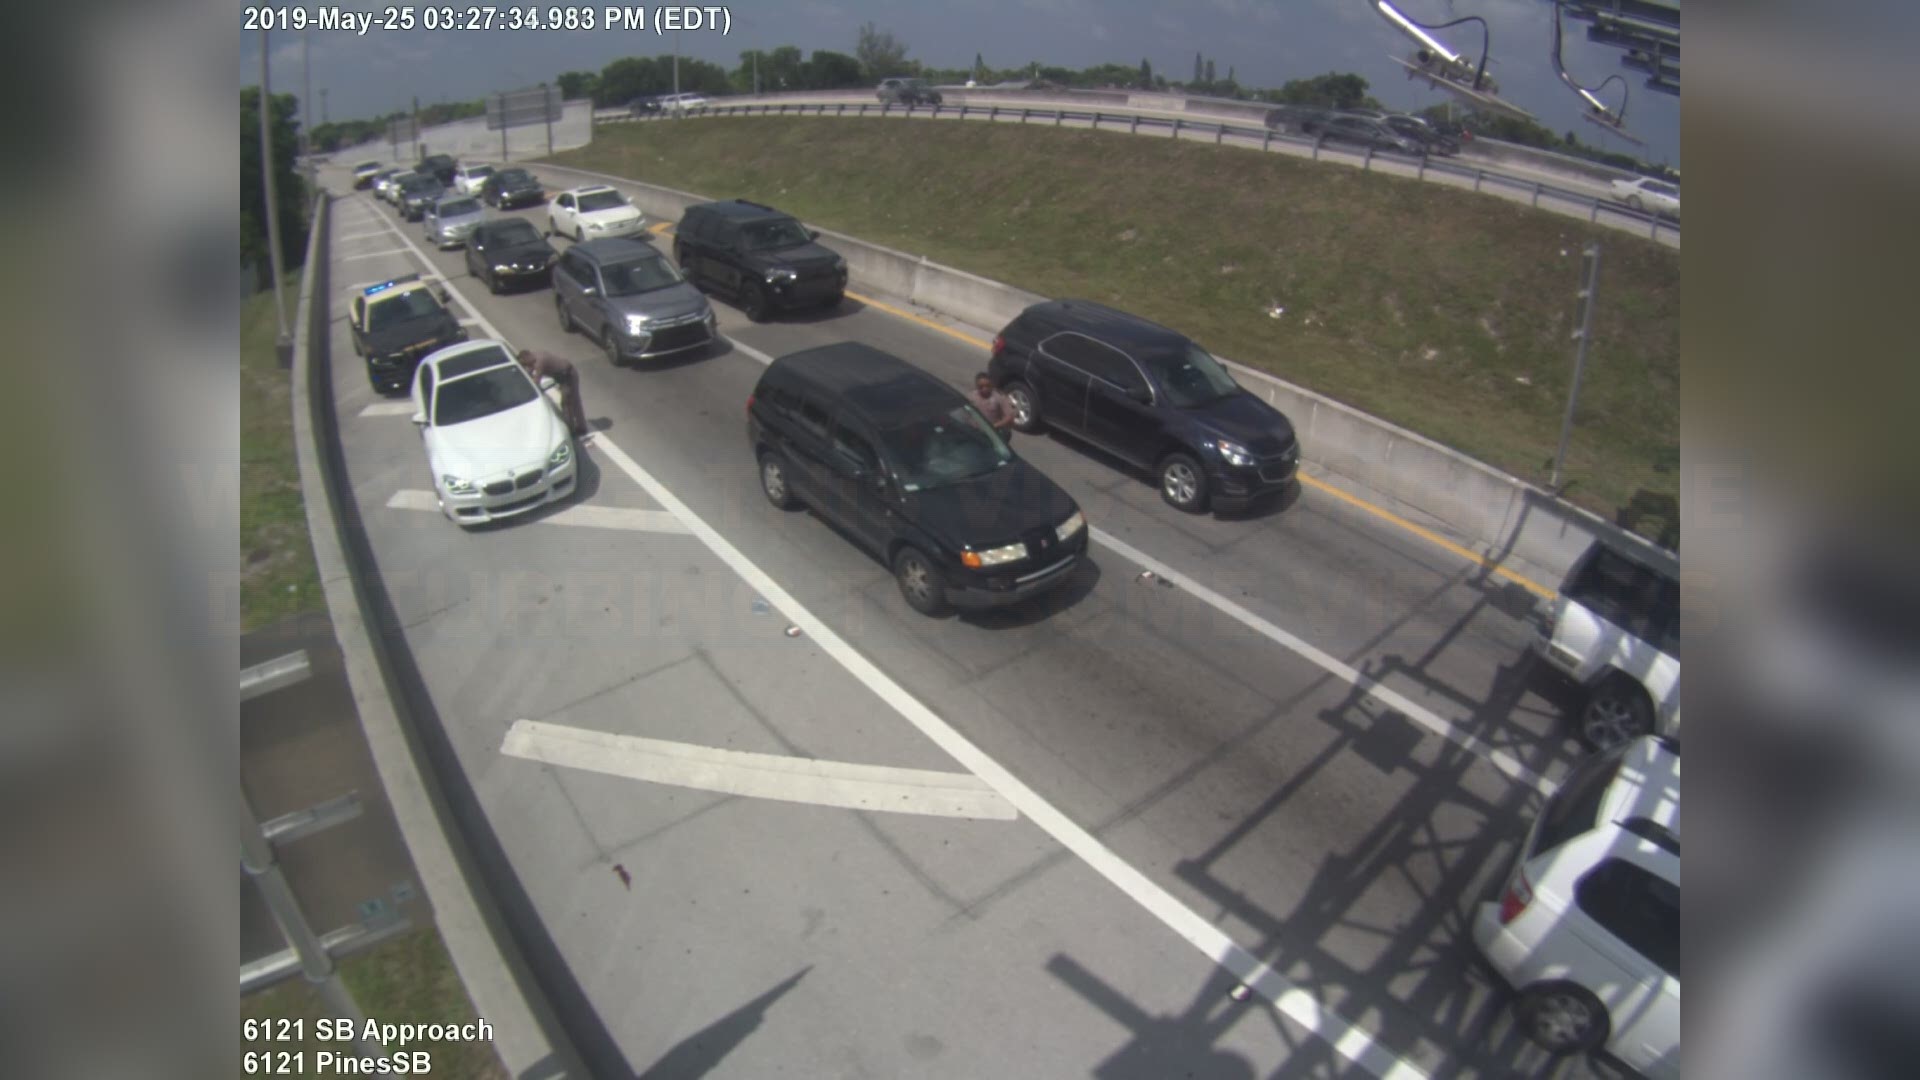 The search is on for a driver of a white BMW that hit a Florida trooper and sped off.

The crash happened during a May 25 traffic stop on the southbound exit ramp to Hollywood Boulevard, according to WFOR-TV citing the Florida Highway Patrol.

Trooper Arsenio Caballero was helping another driver during the stop when the BMW suddenly took off and hit him.